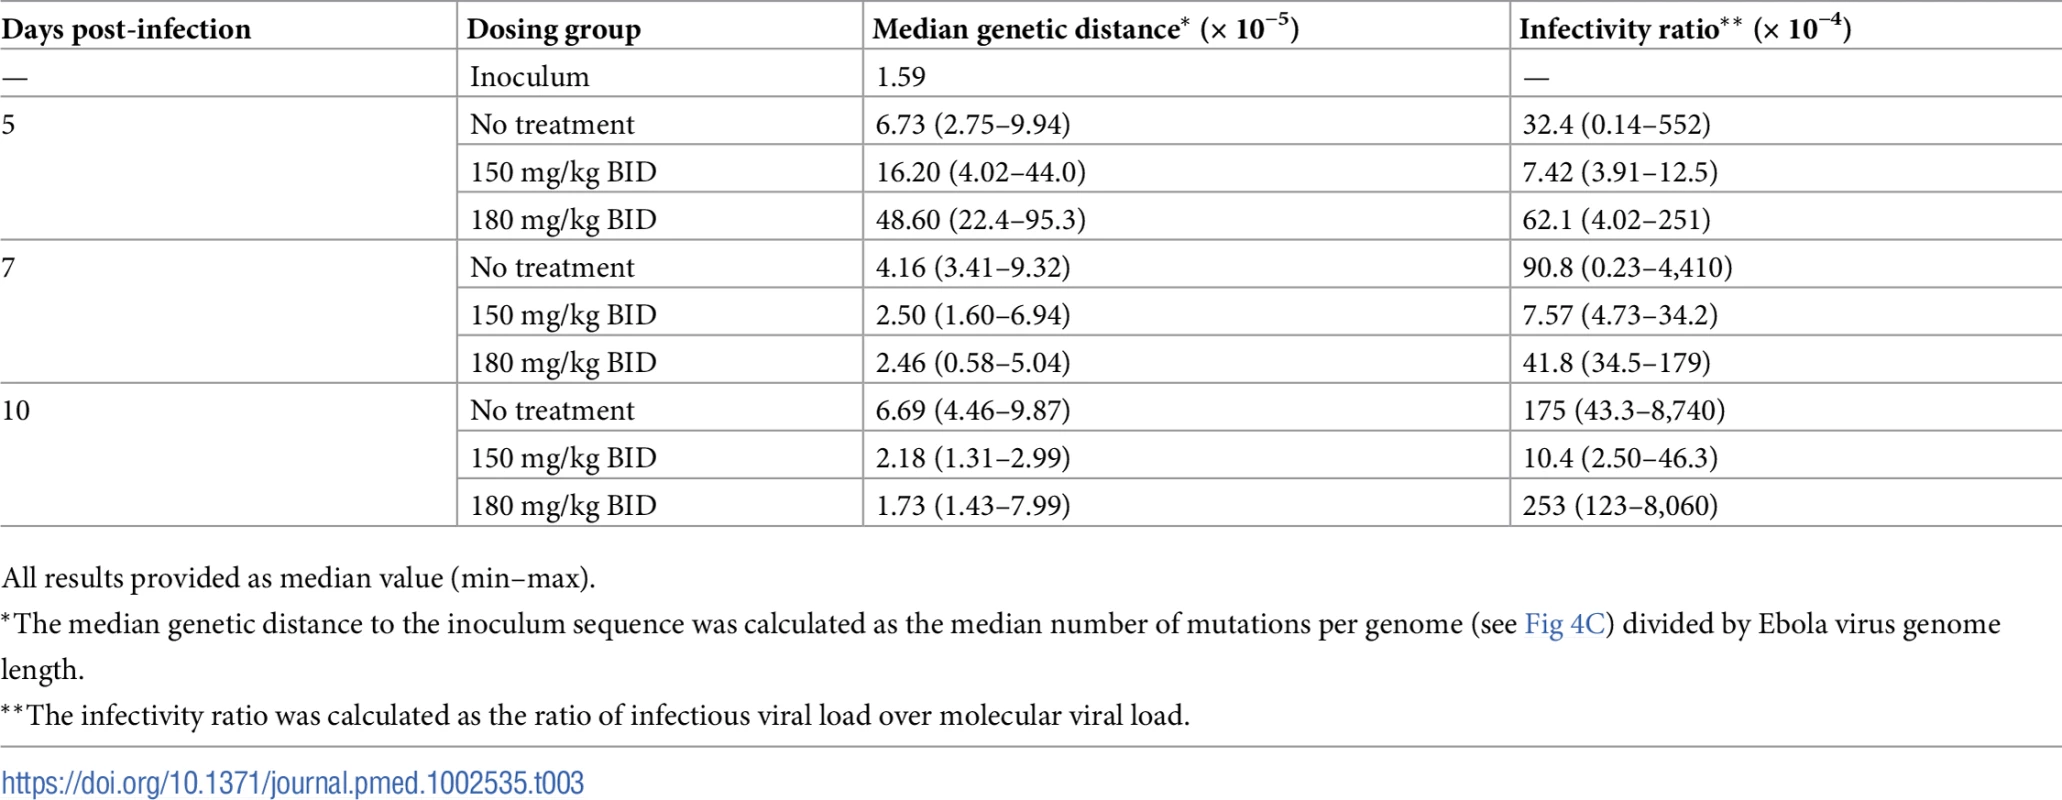 Median genetic distances and infectivity ratio values according to time and dosing group.